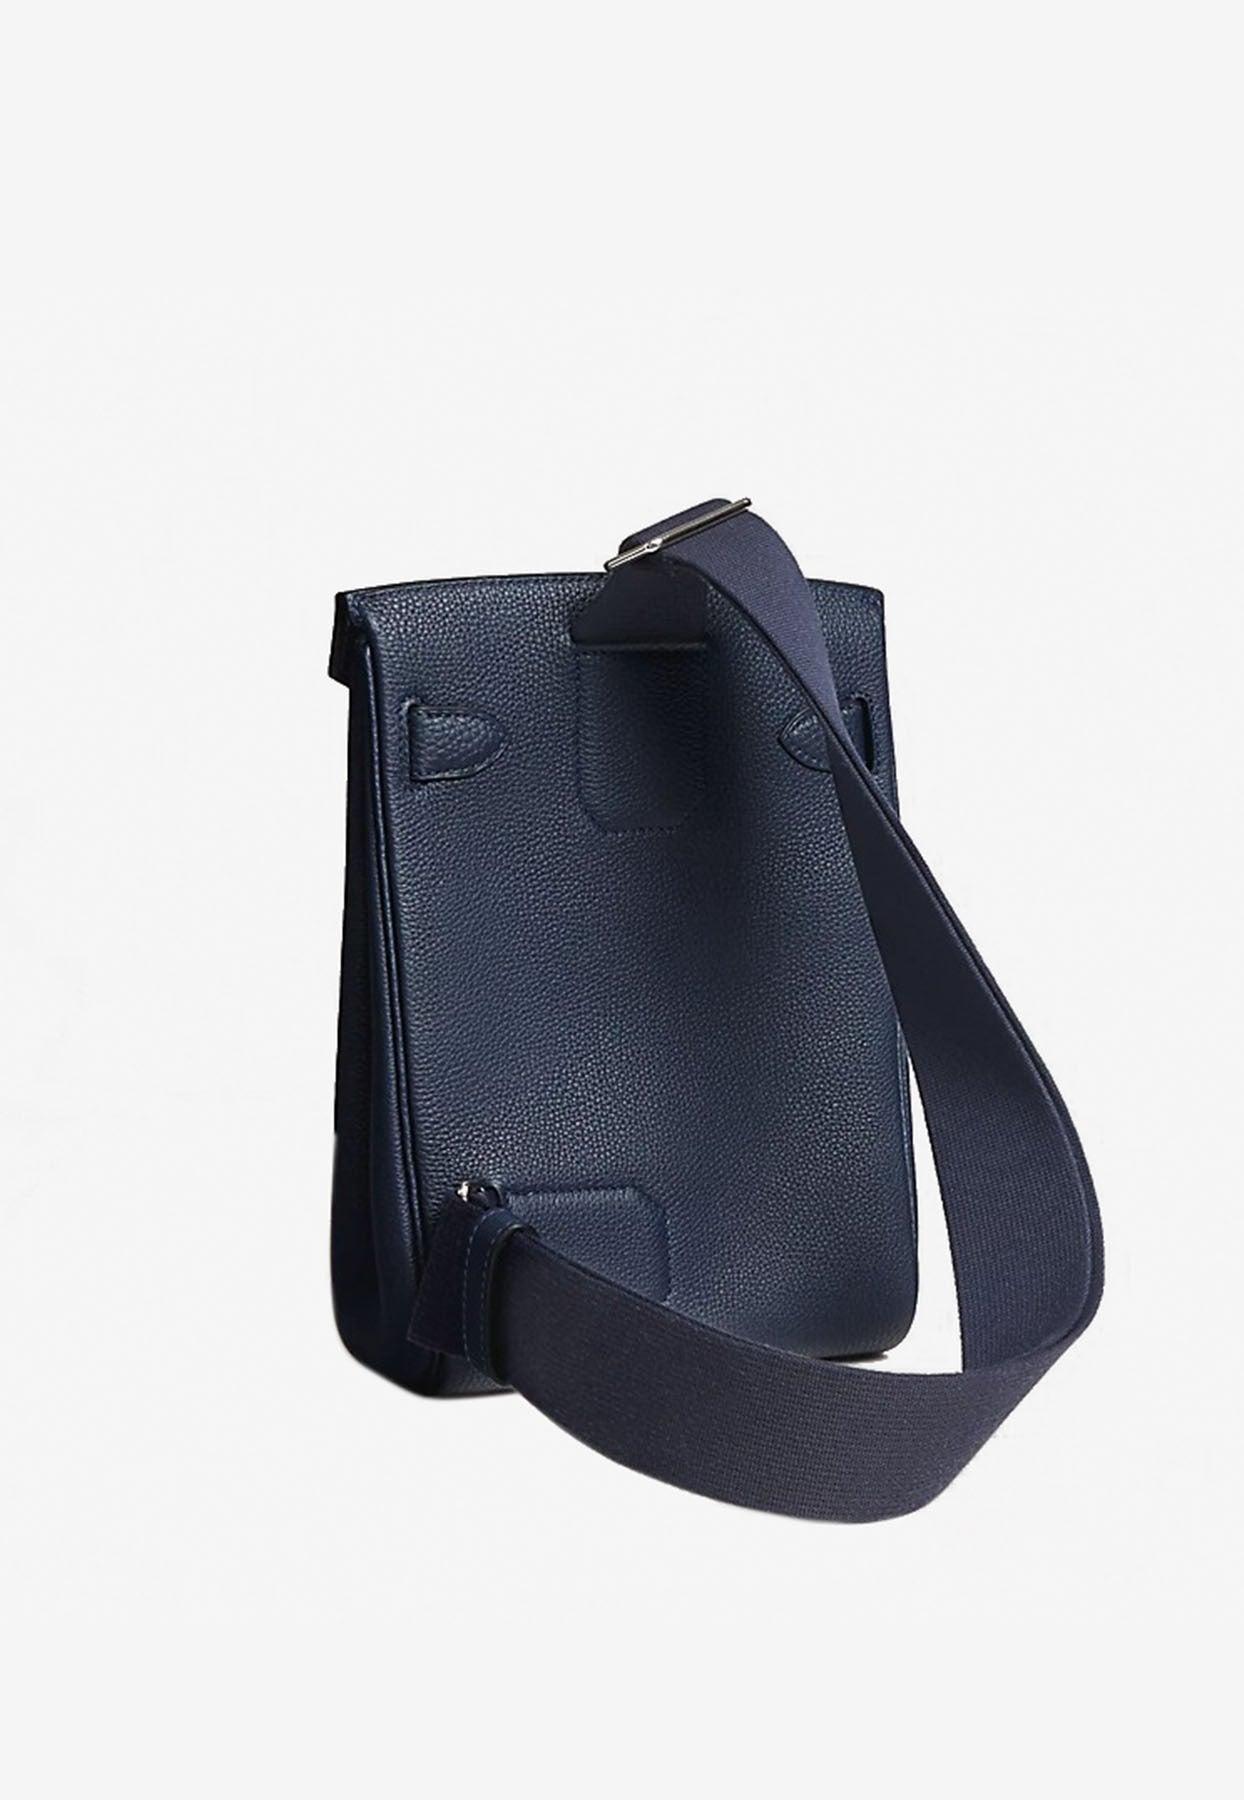 Hermès Hac A Dos Pm Backpack In Bleu Nuit Togo With Palladium